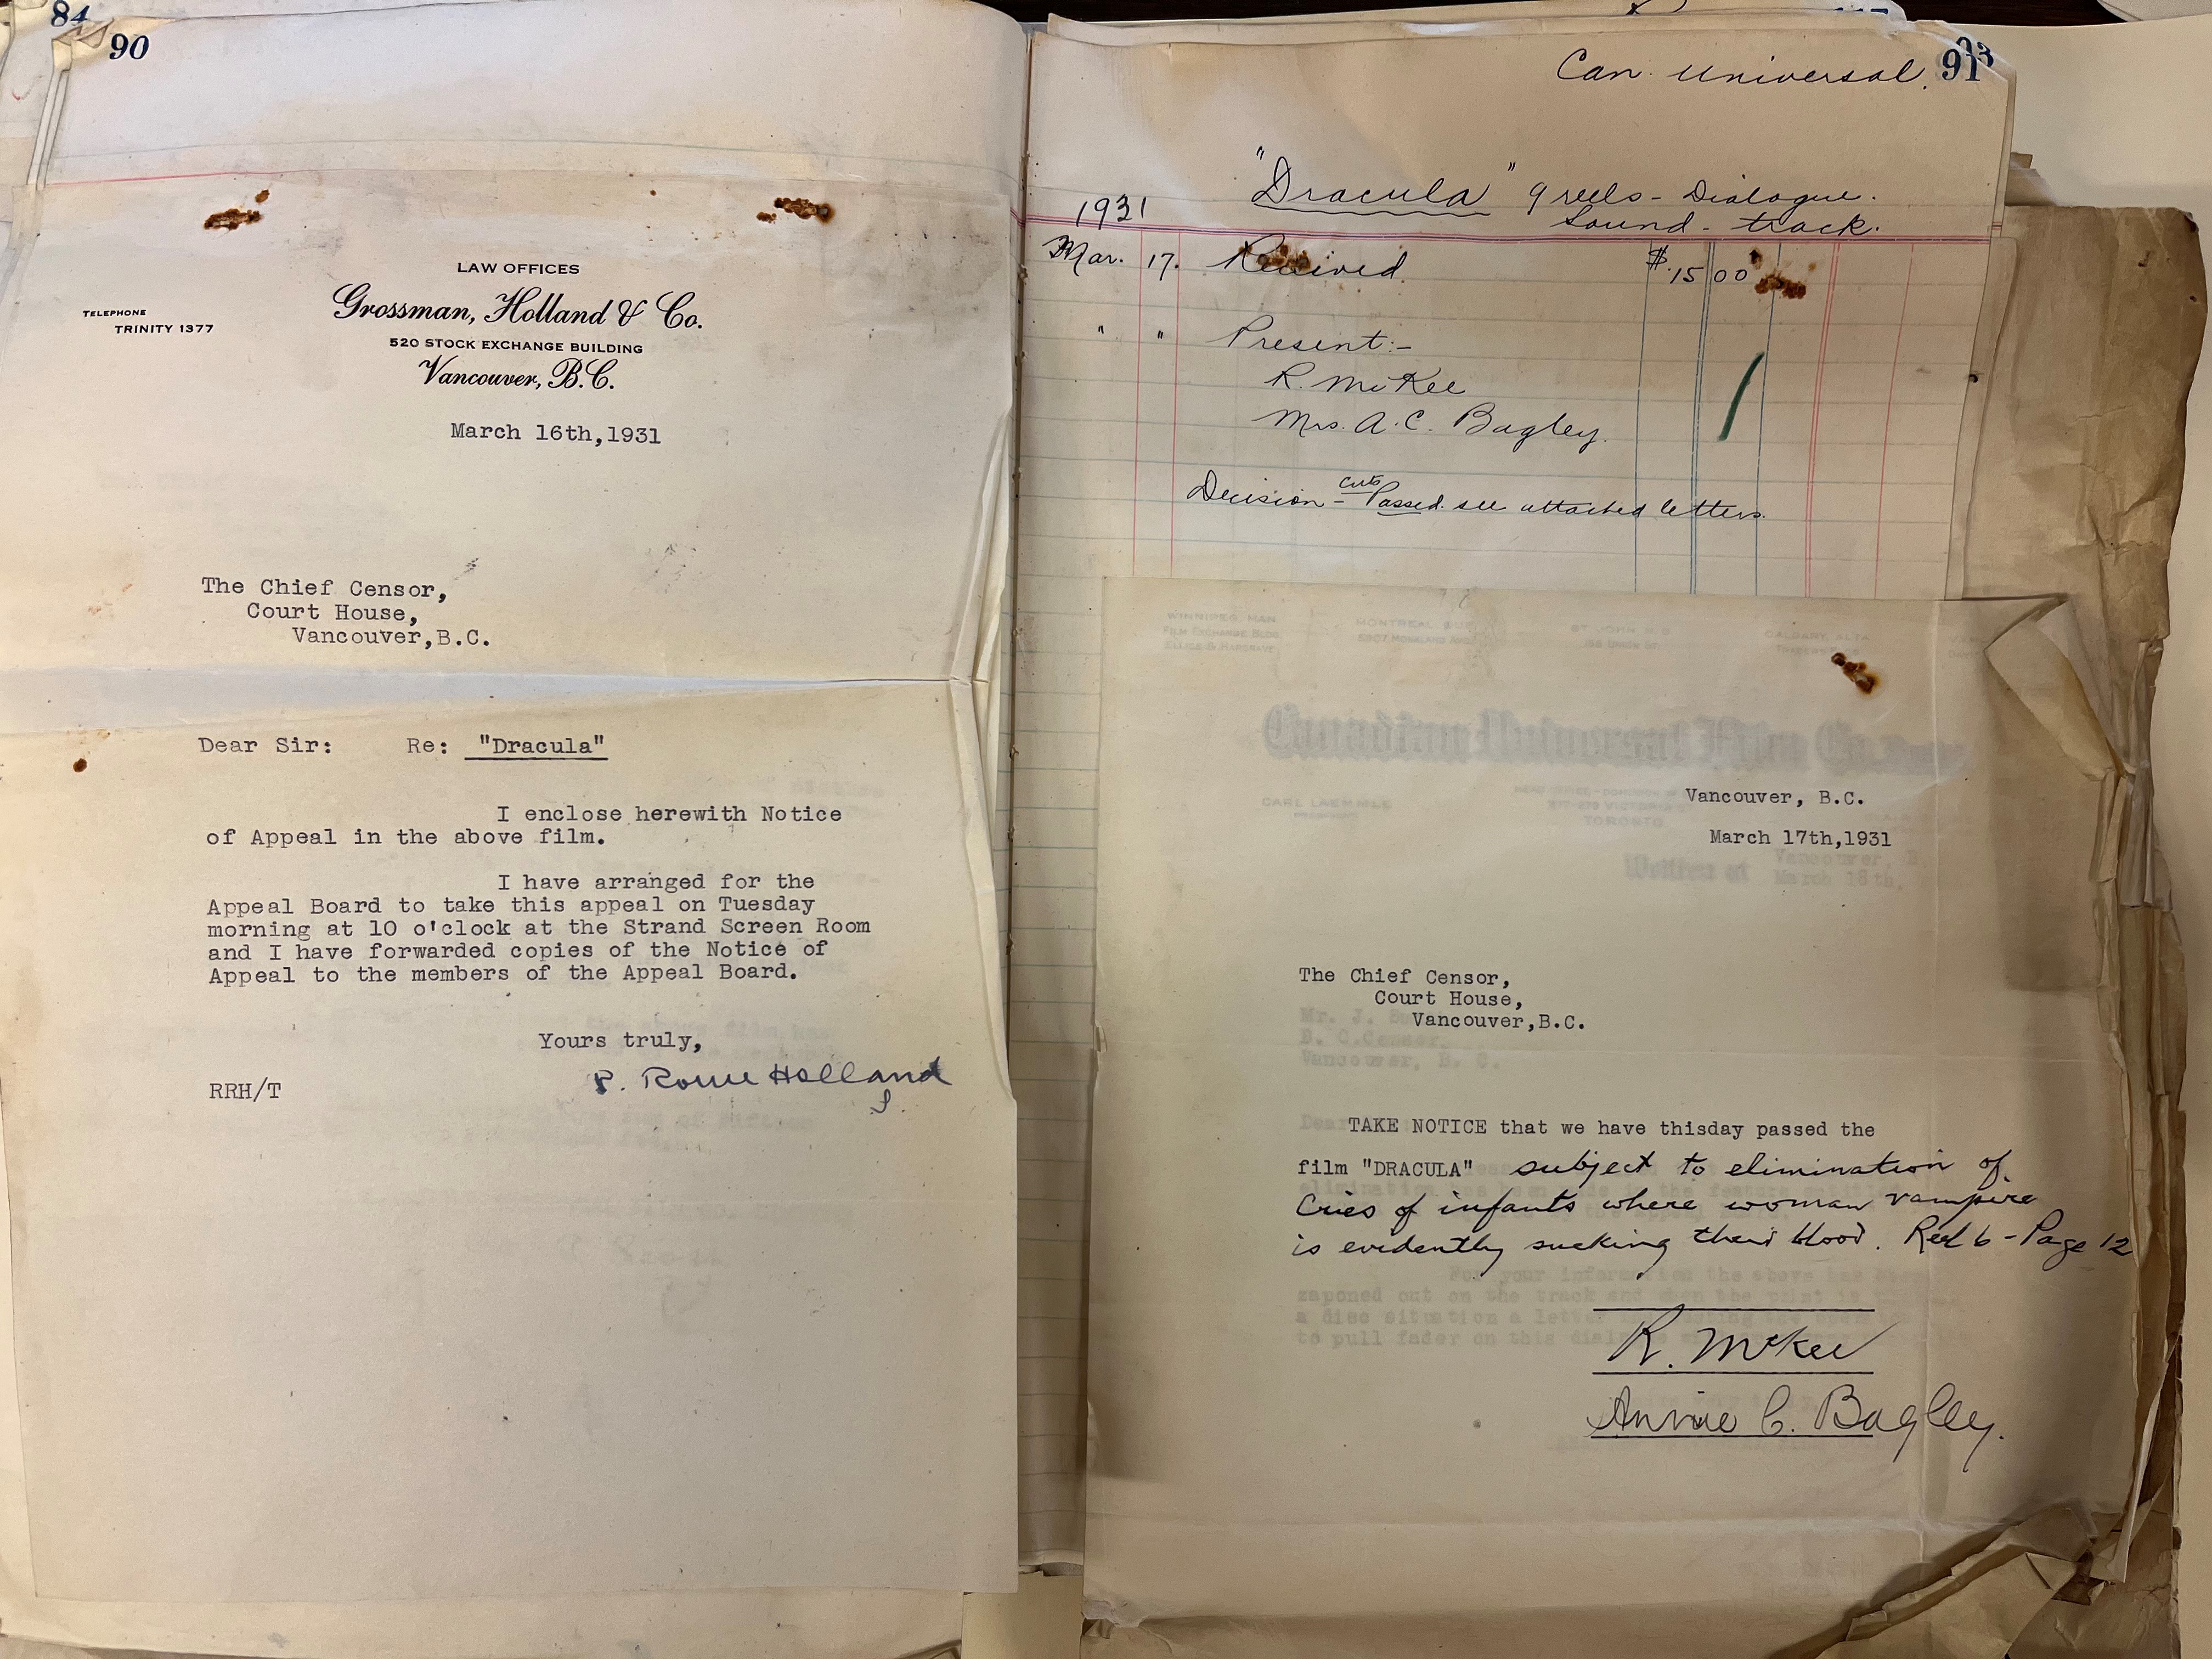 Records from GR-4097 appealing the censor’s decision to cut a scene from the 1931 film Dracula.